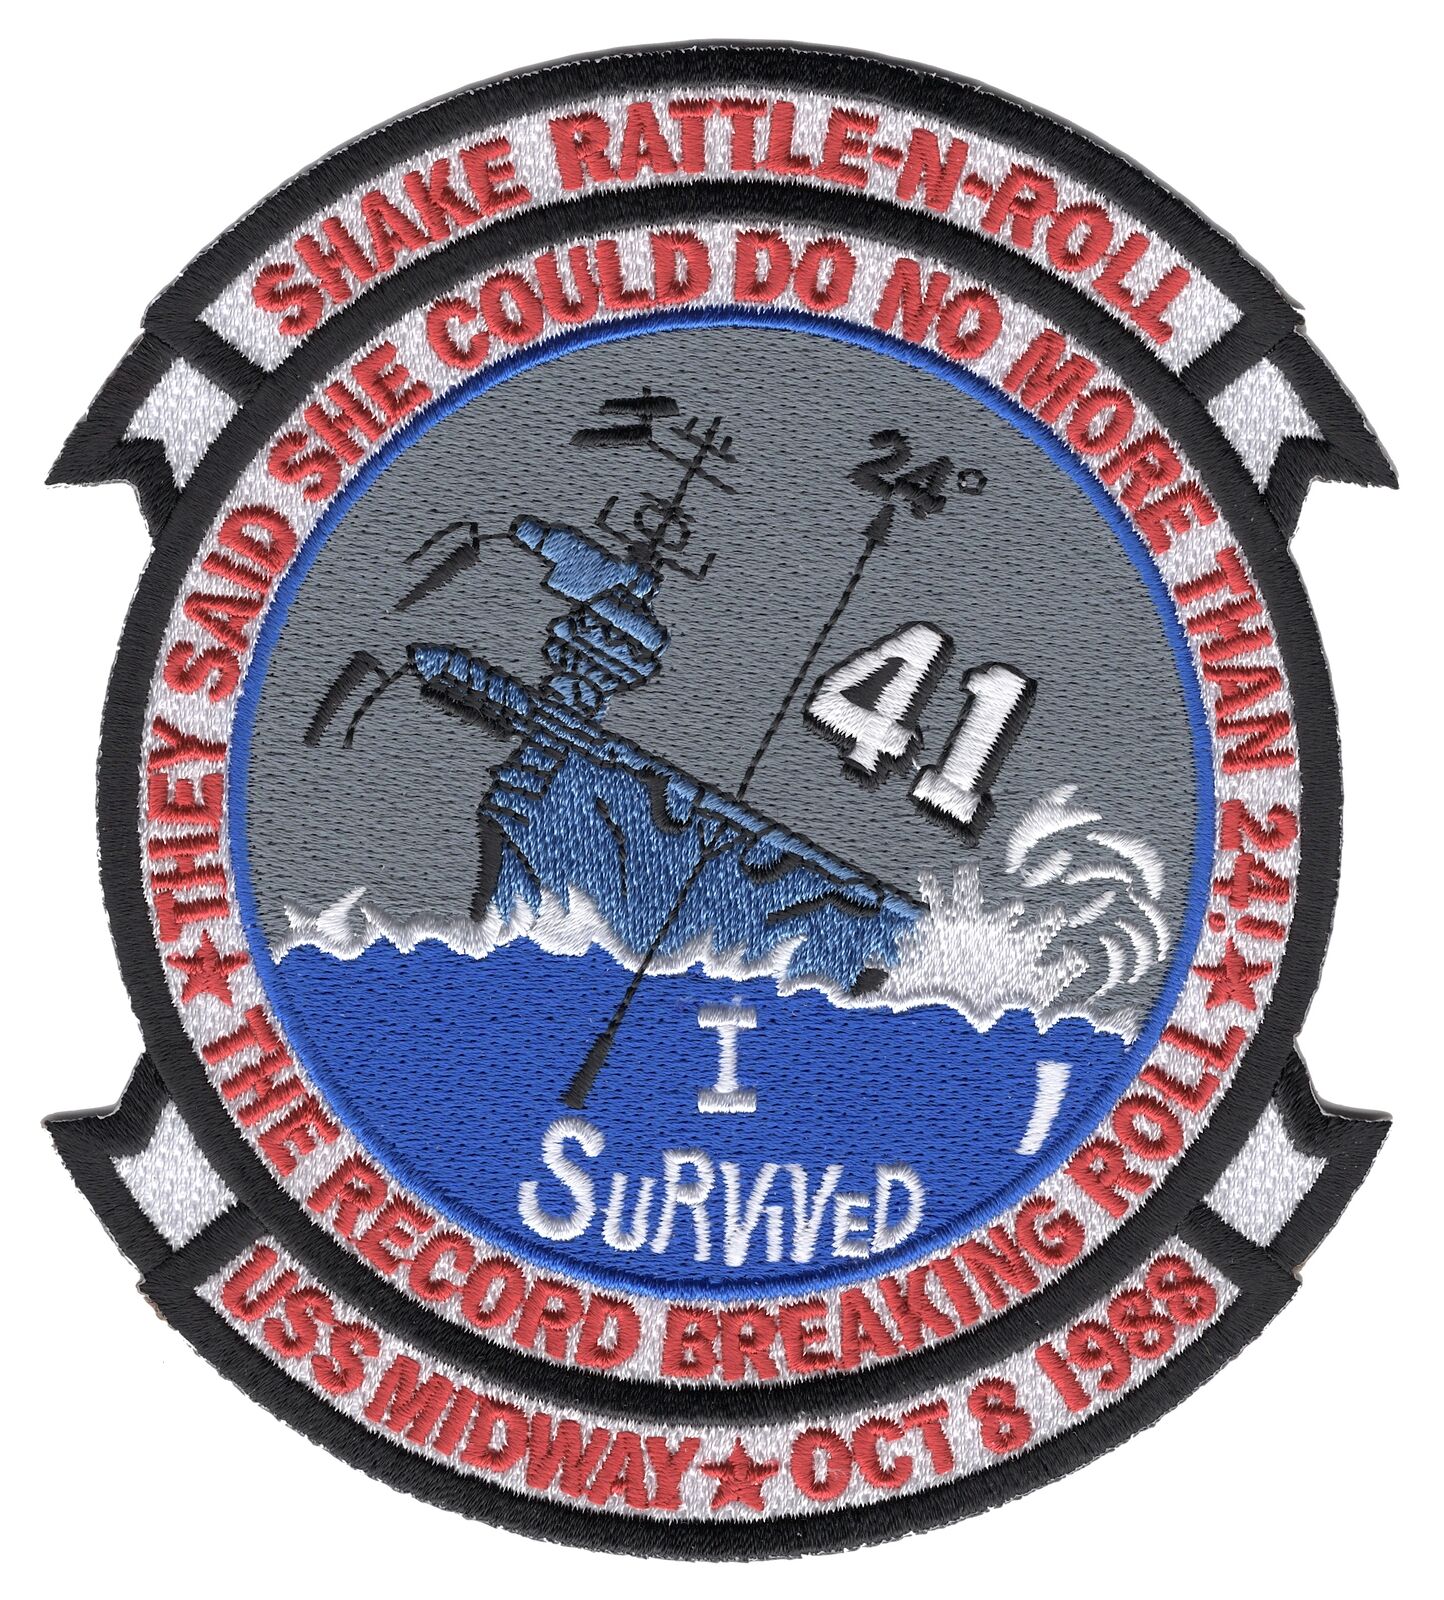 CV-41 USS Midway Patch Survived 24 Degree Roll